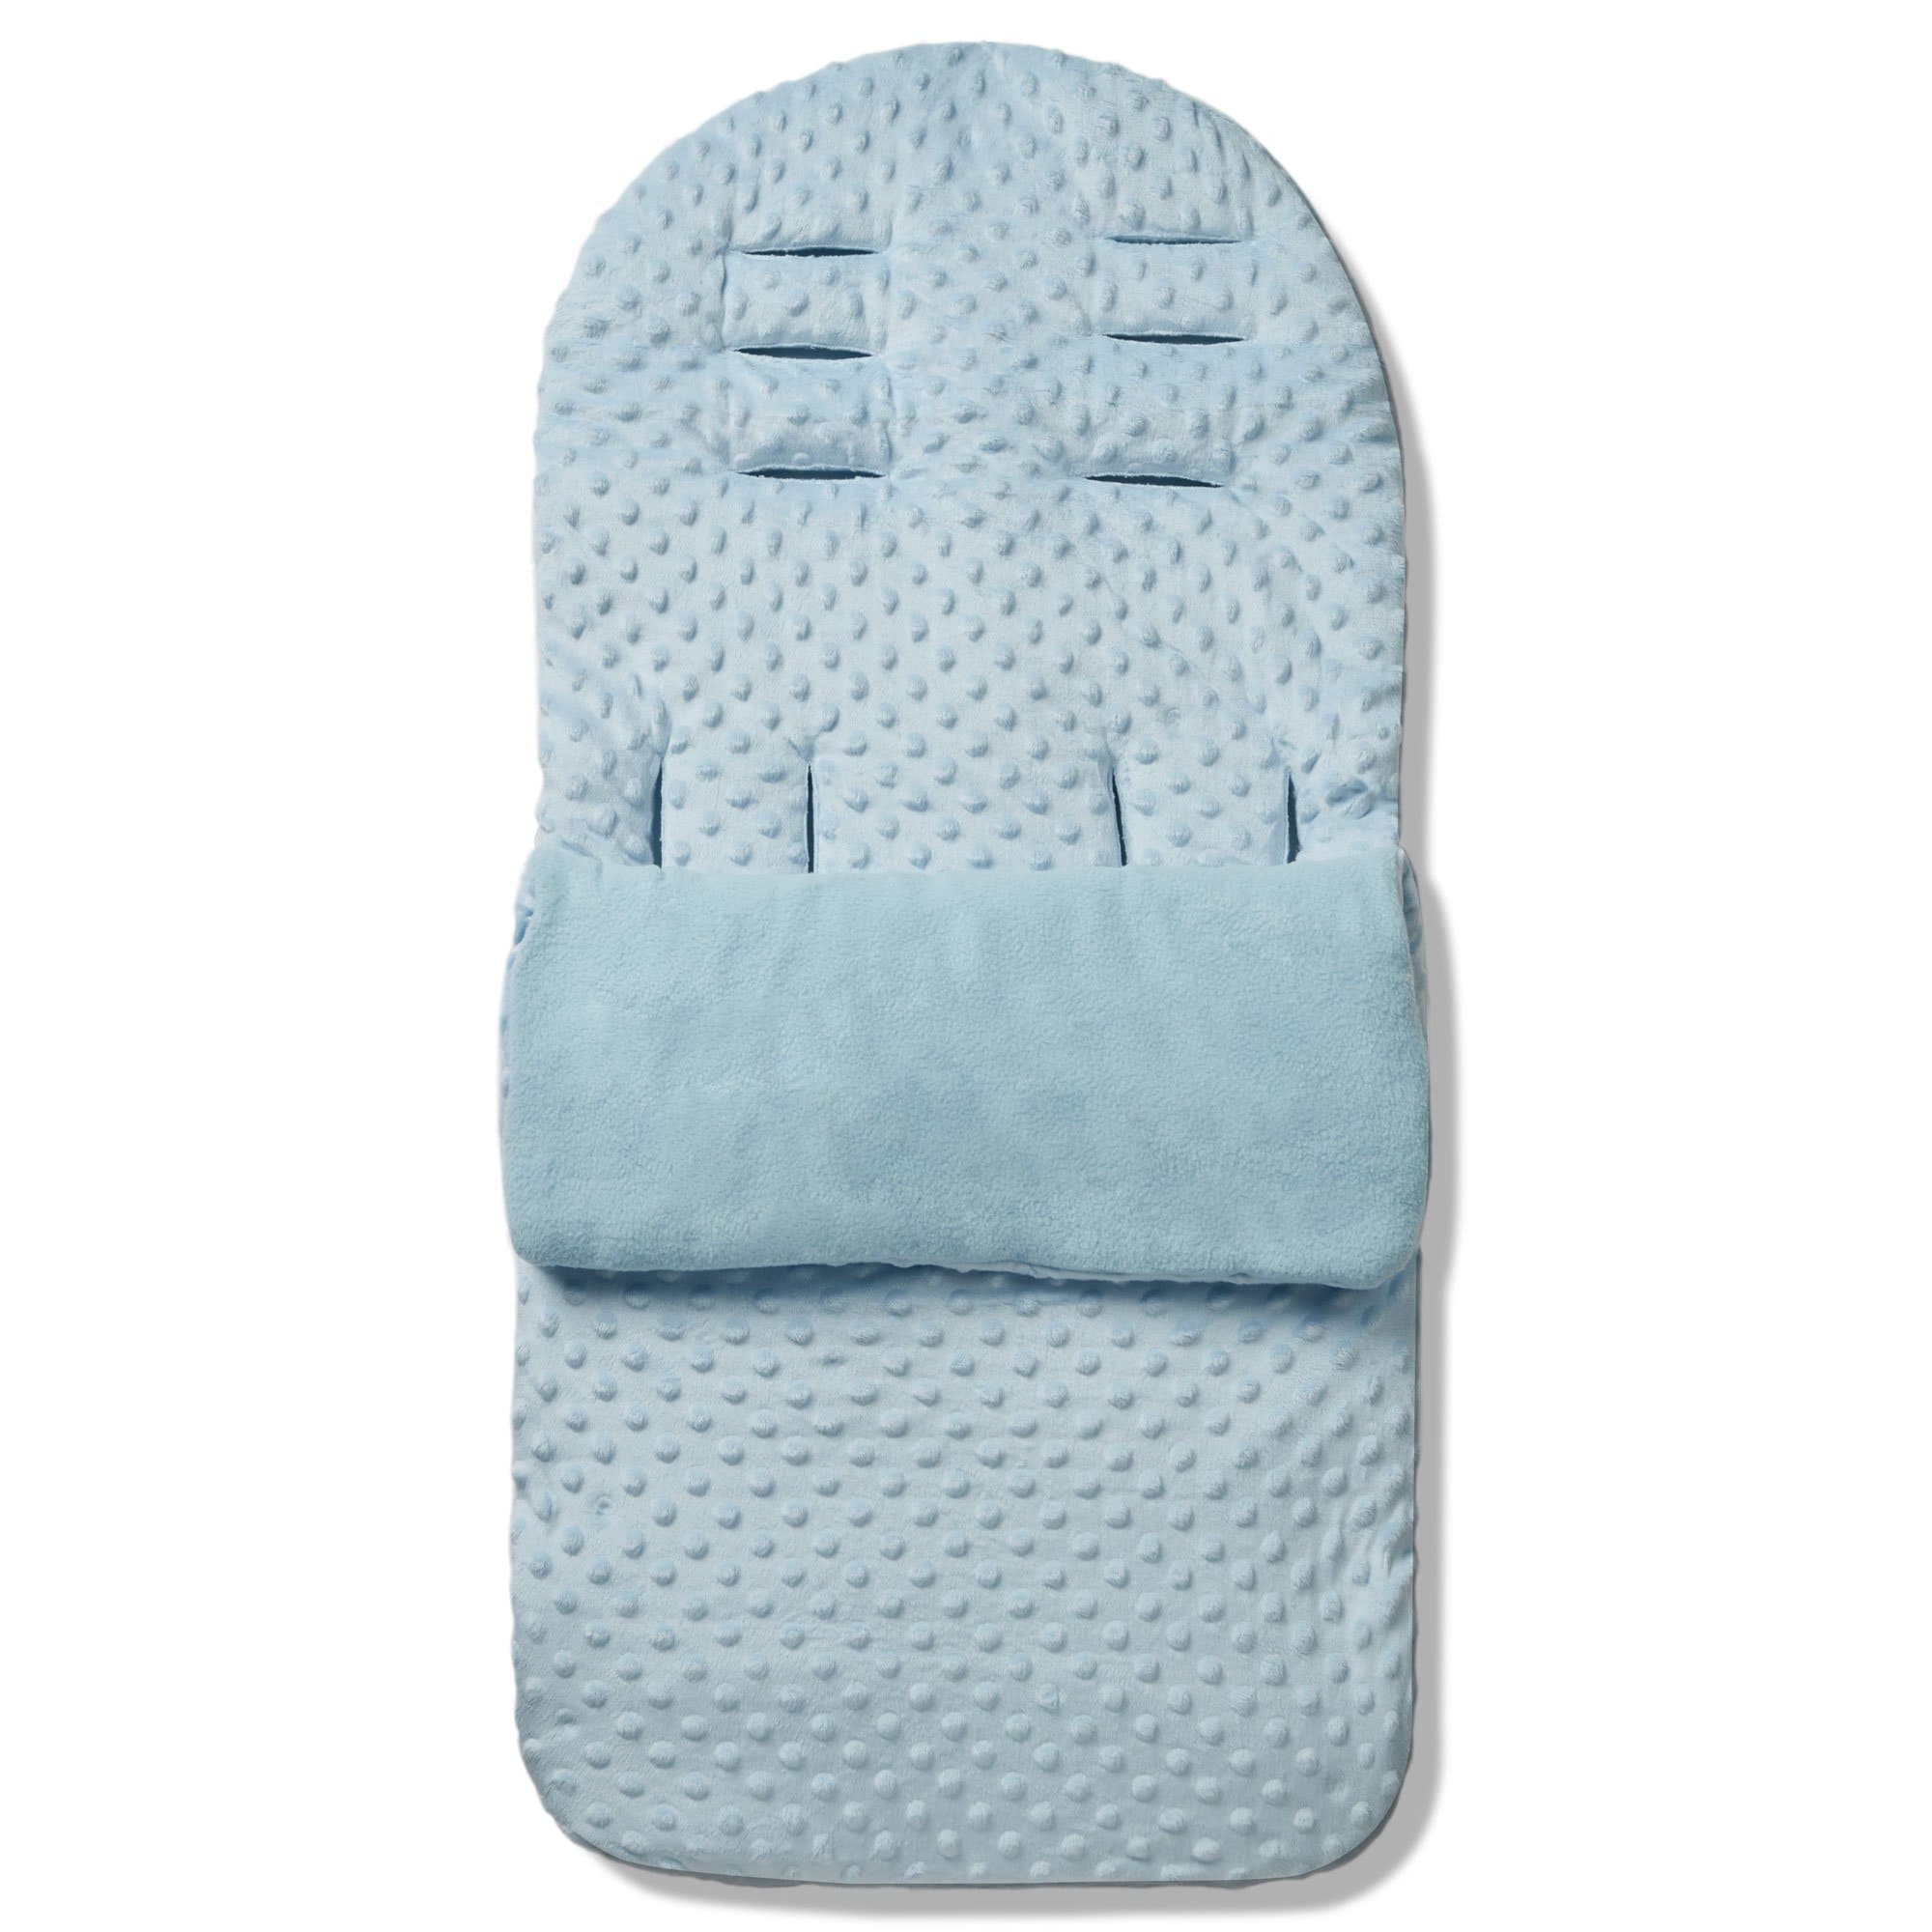 Dimple Footmuff / Cosy Toes Compatible with Easywalker - For Your Little One